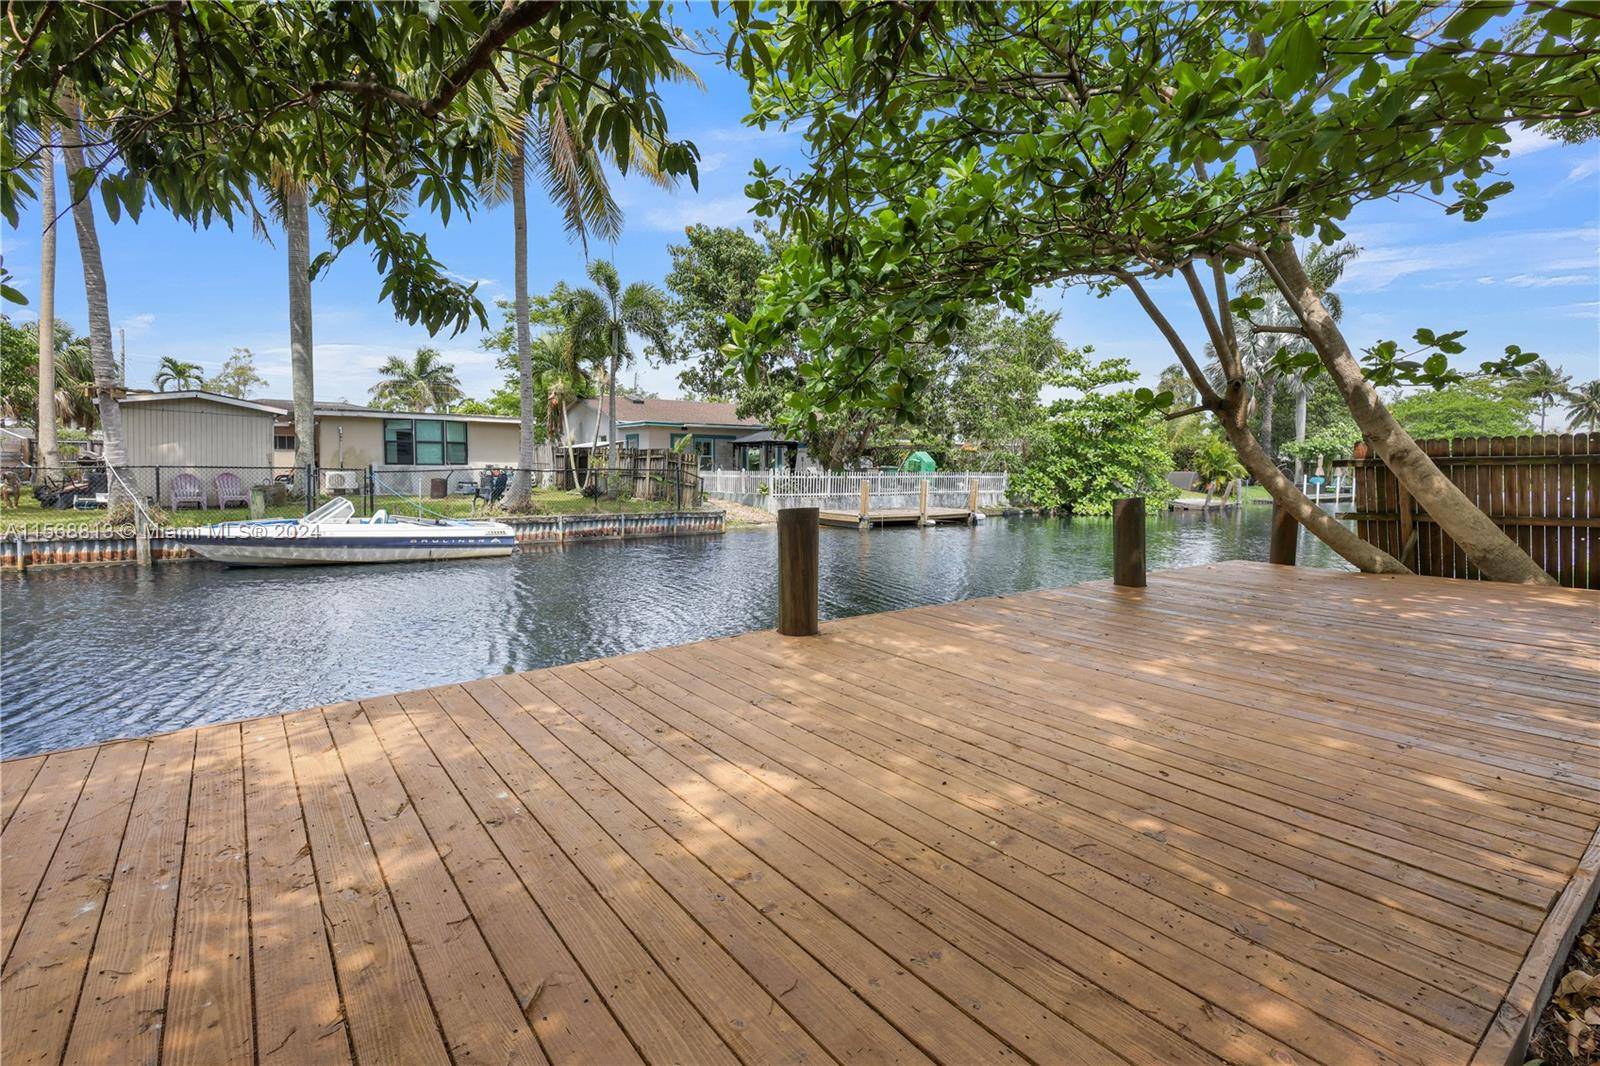 This magnificent Boater's paradise Single Family home with Direct Ocean Access offers a blend of luxury and comfort that is truly exceptional.